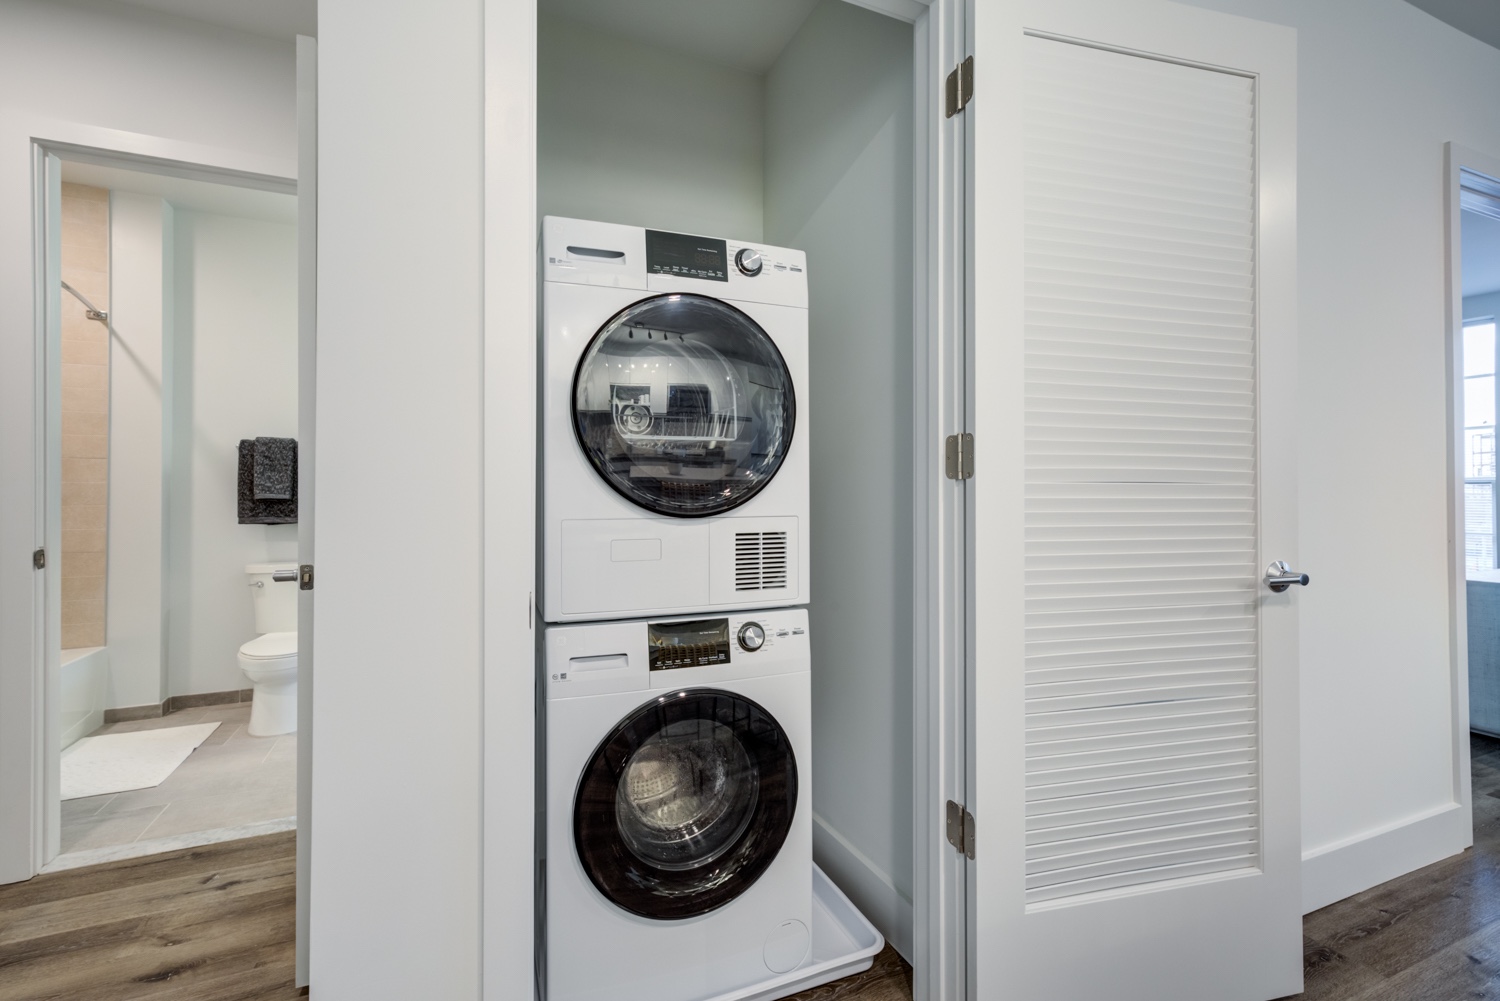 Washer and dryer with open toilet and bedroom door at the background. Inside our luxury apartments at 250 Mission.